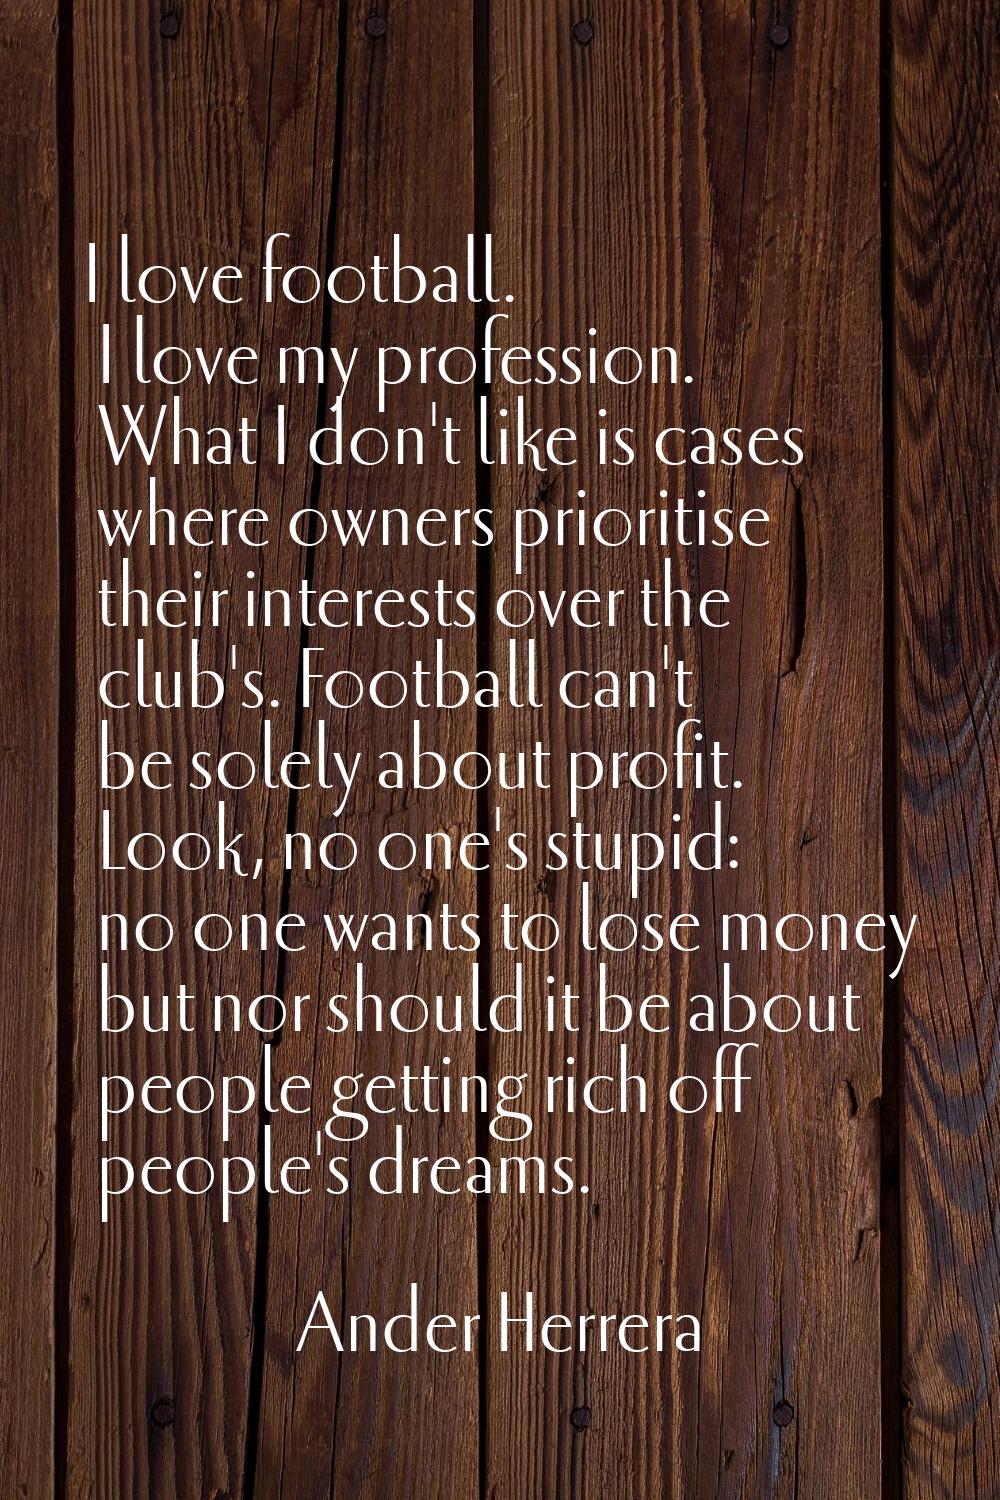 I love football. I love my profession. What I don't like is cases where owners prioritise their int